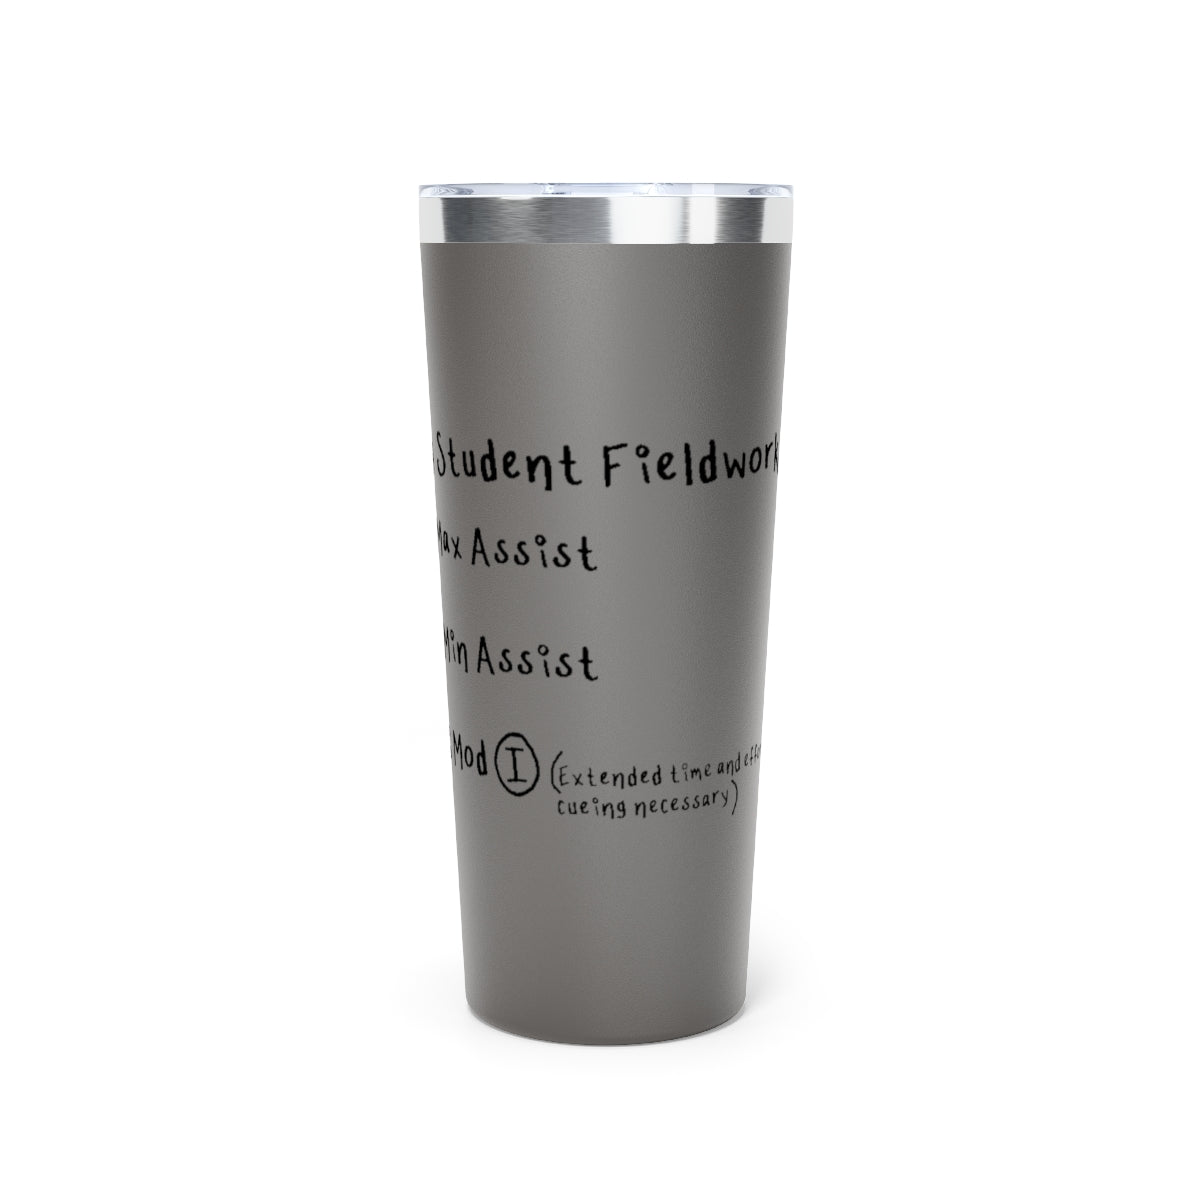 Therapy Student Fieldwork Goals Copper Vacuum Insulated Tumbler, 22oz